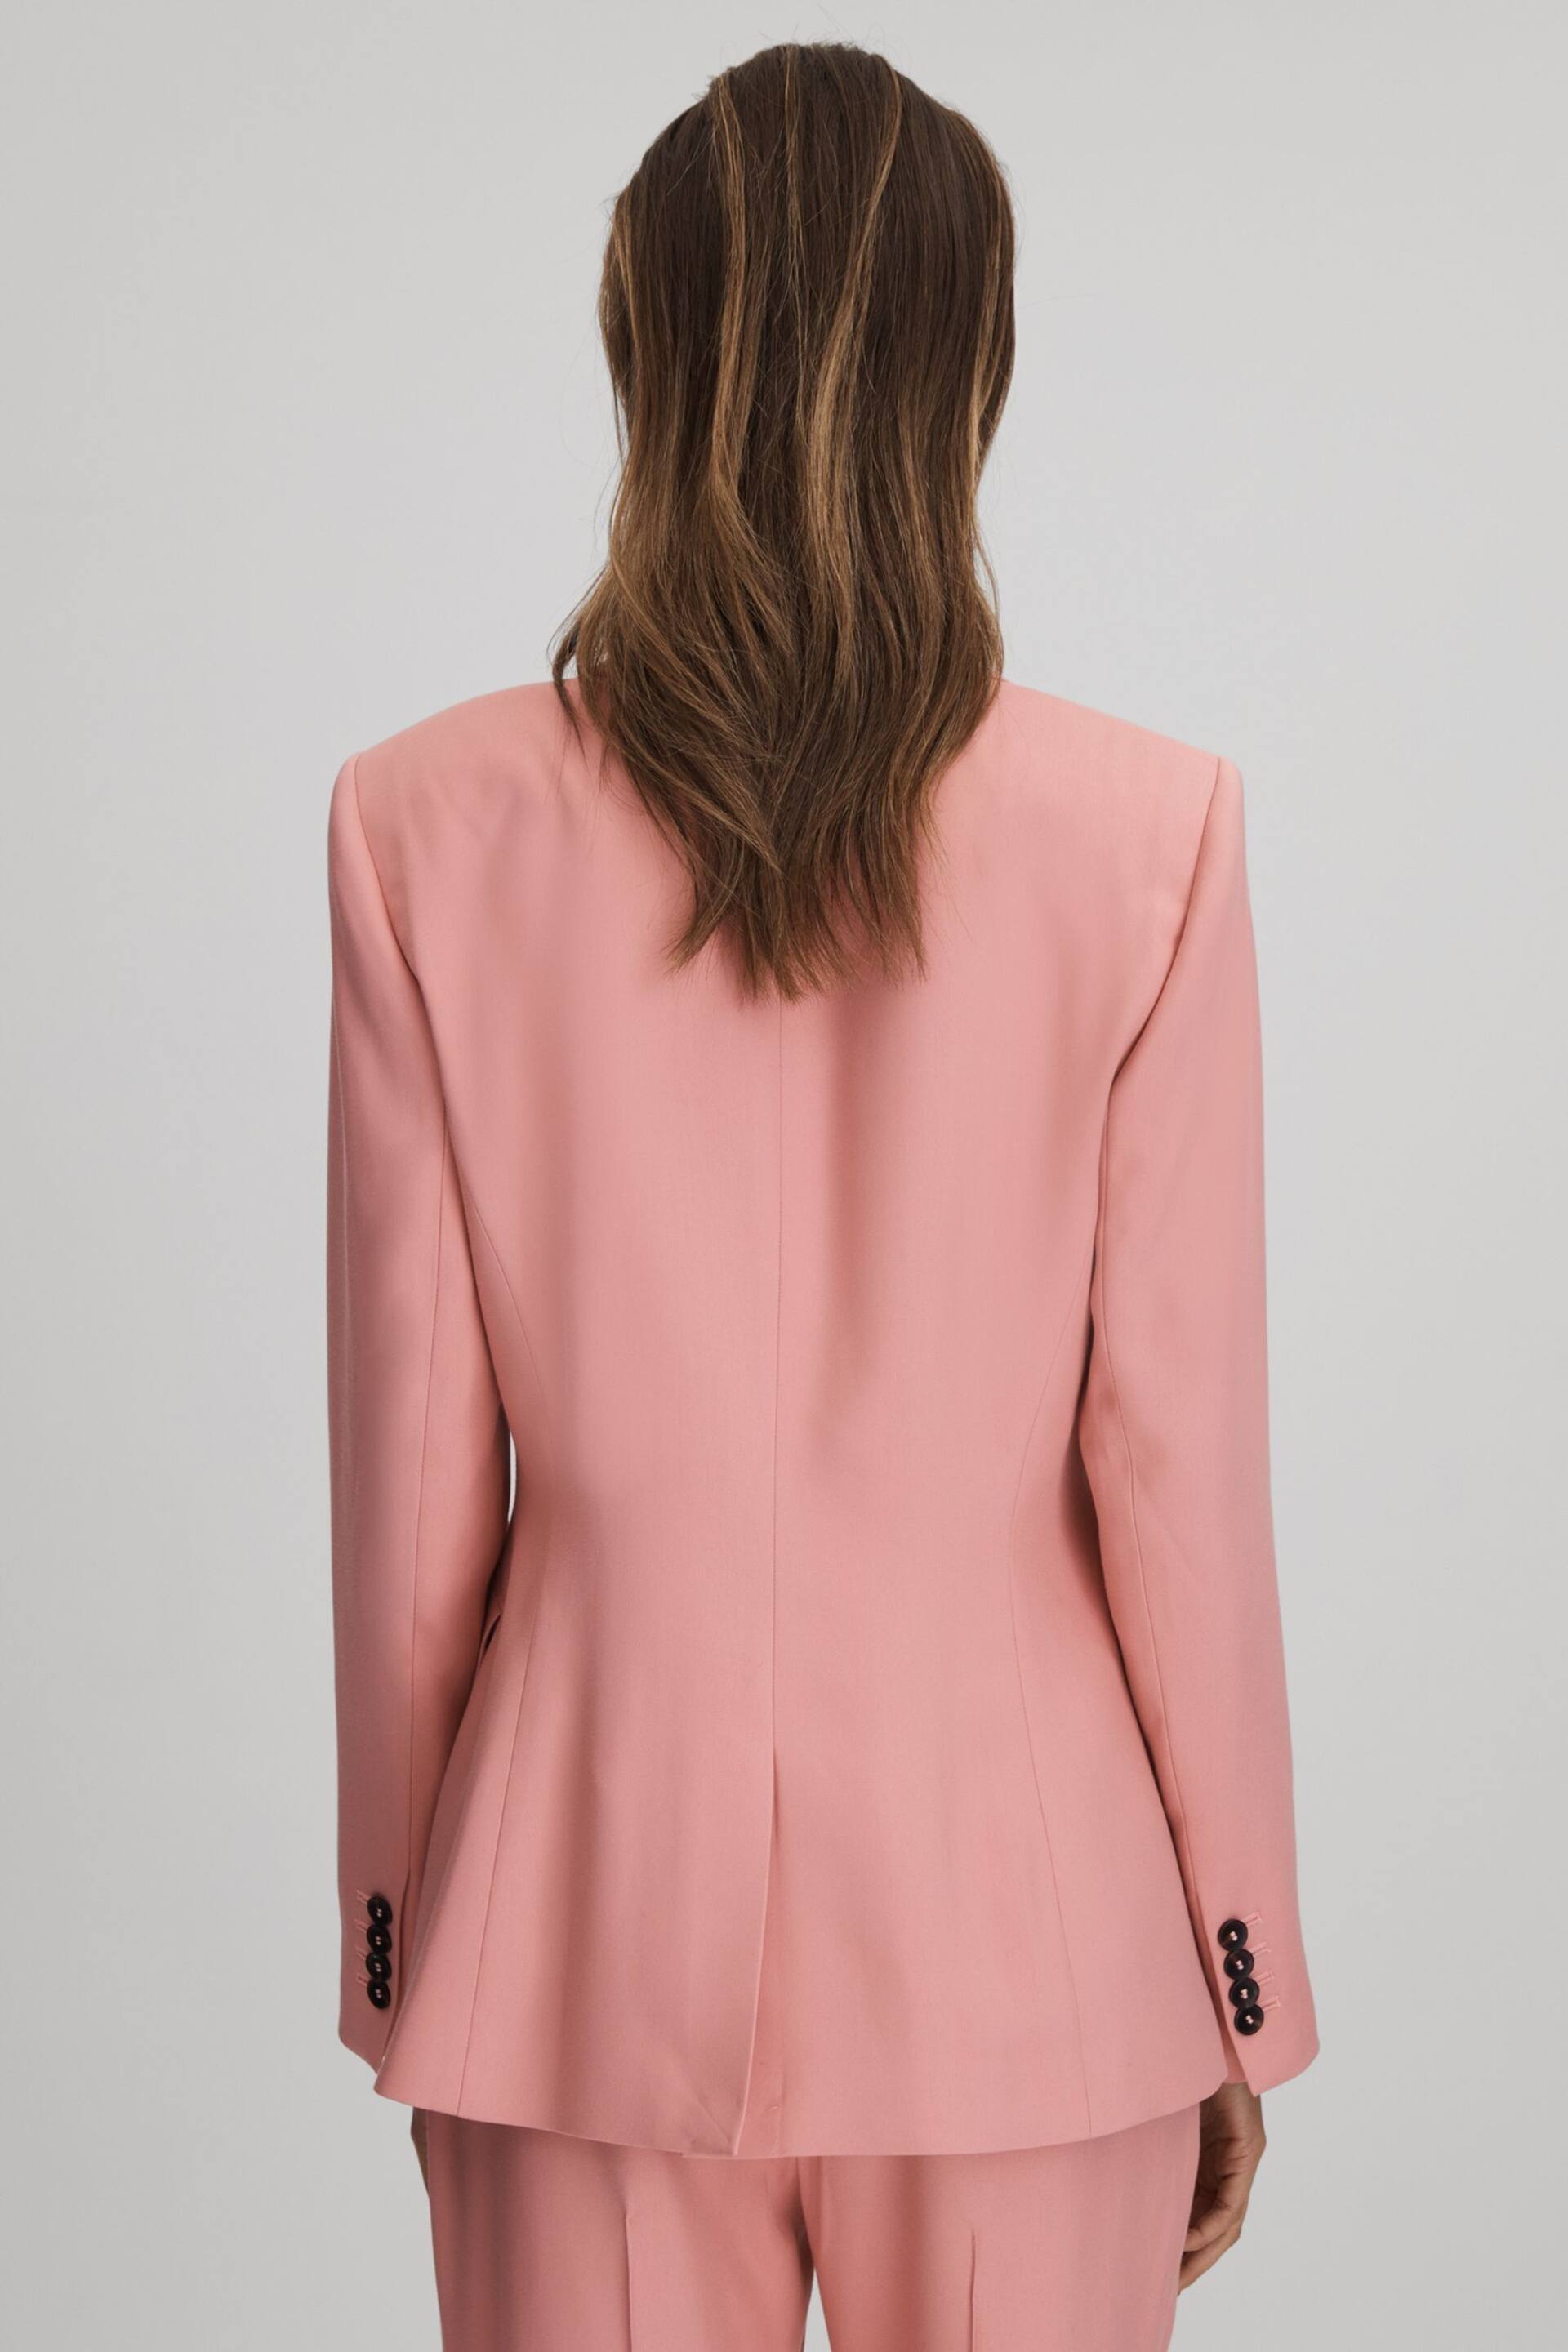 Reiss Pink Millie Tailored Single Breasted Suit Blazer - Image 5 of 7